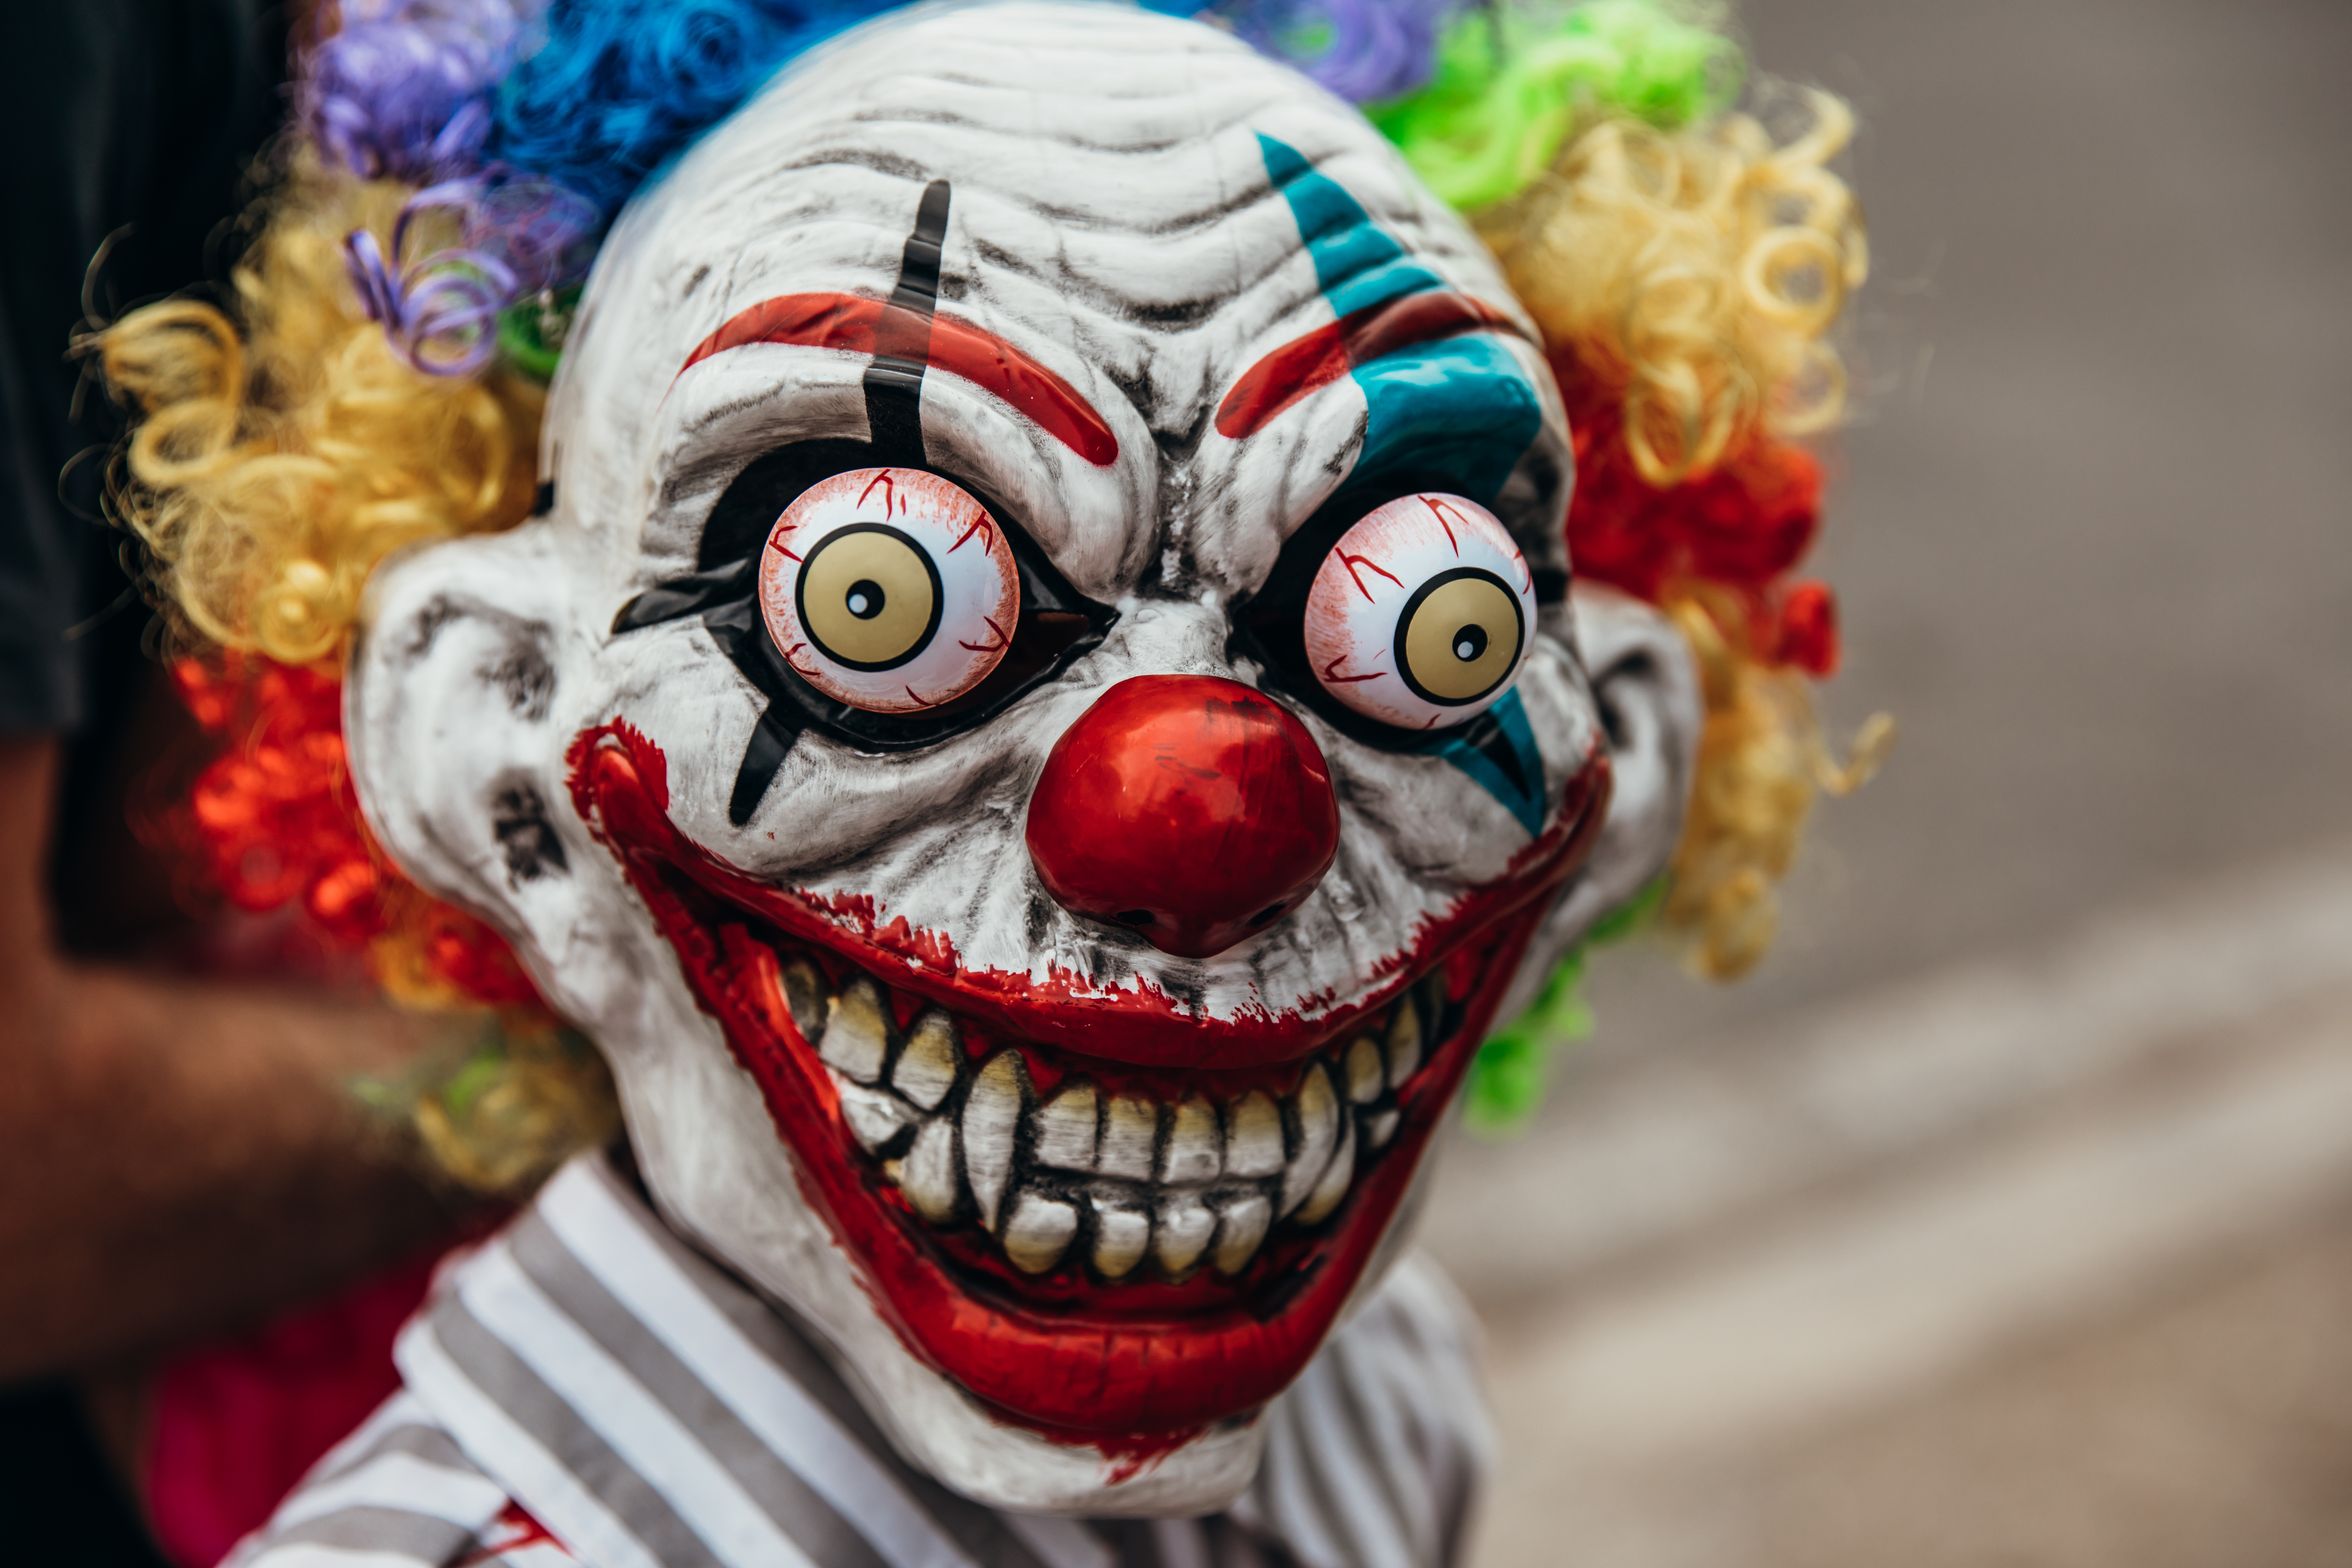 Clown Porn Nude Male Good Looking - The History of Creepy Clowns, Explained | Snopes.com